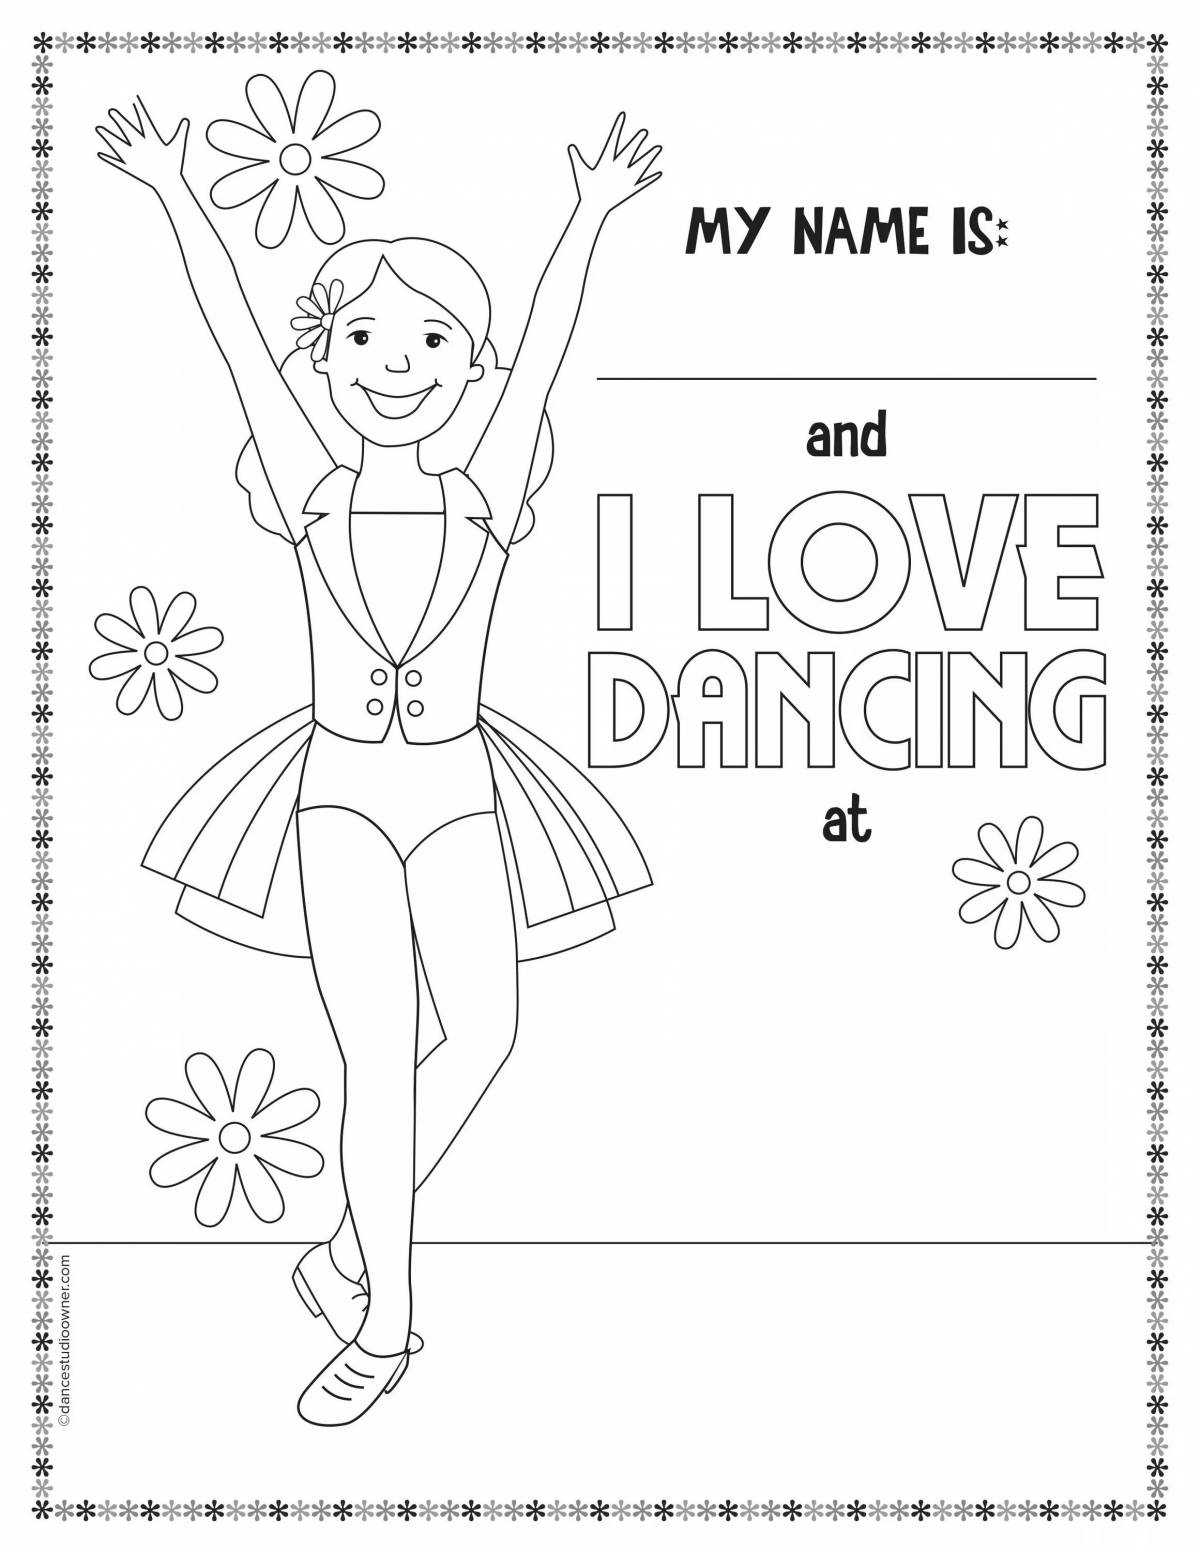 Sparkly dancing coloring pages for kids